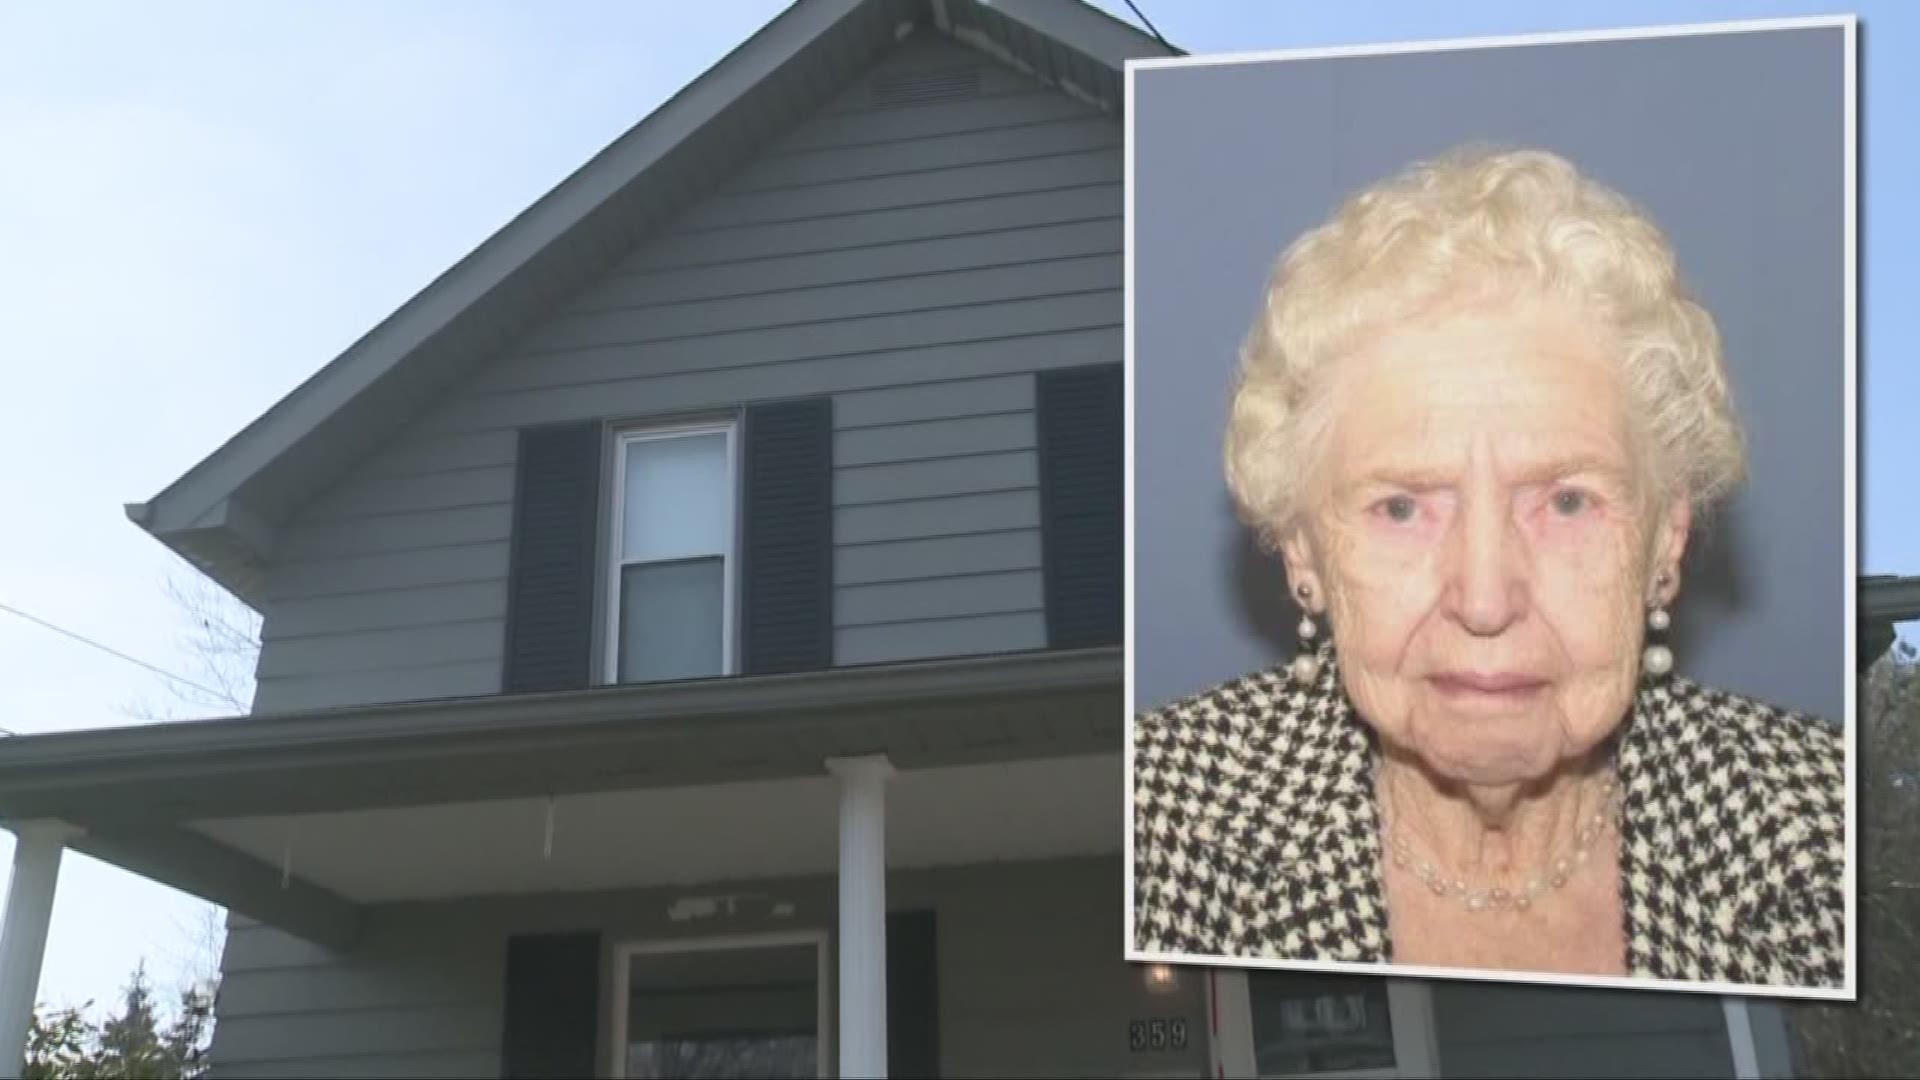 April 17, 2018: Margaret Douglas was discovered in a closet inside her Portage Street home last Monday when officers performed a welfare check.